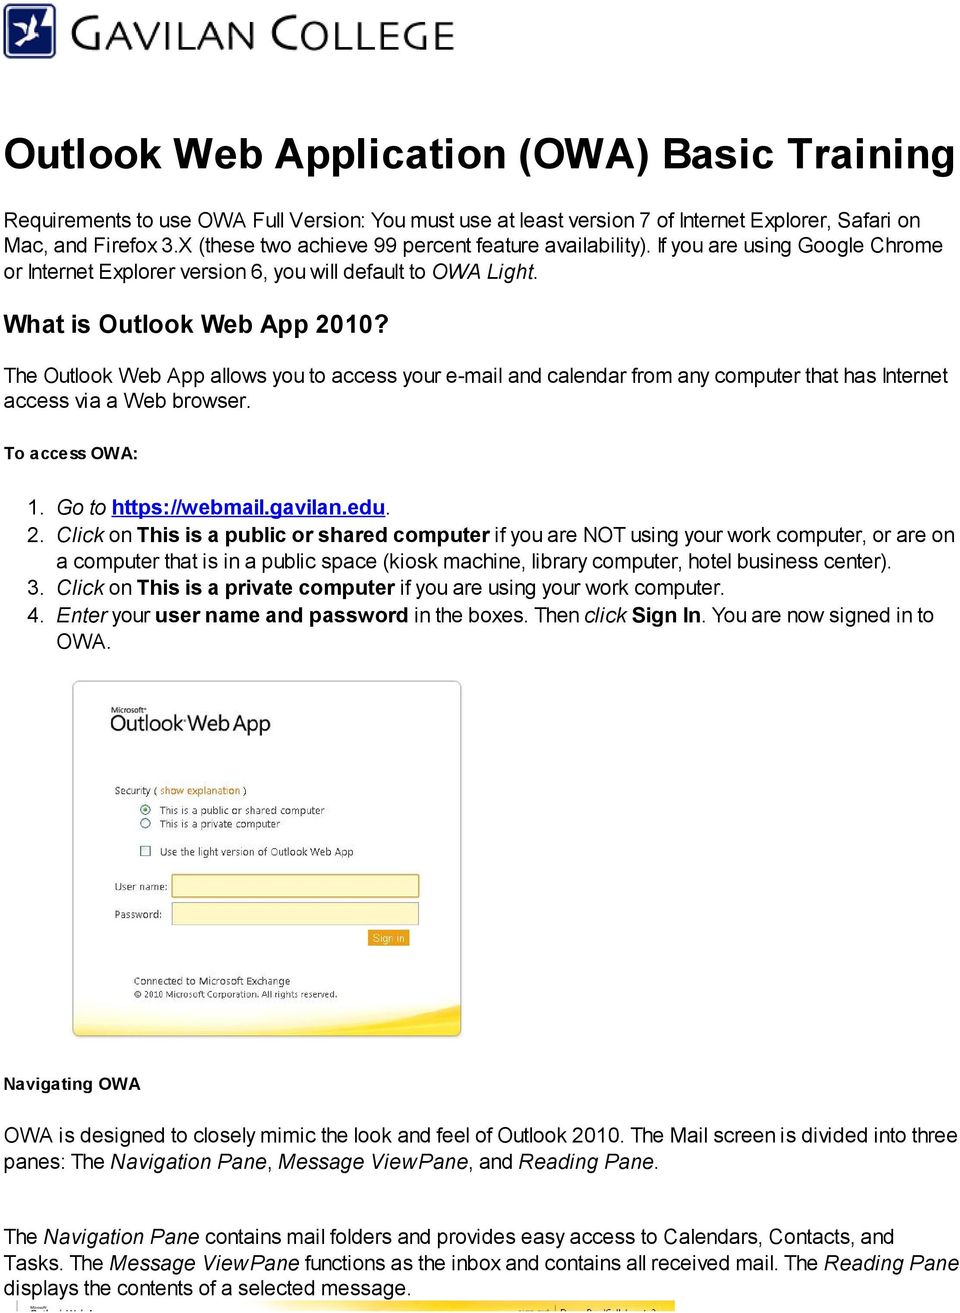 The Outlook Web App allows you to access your e-mail and calendar from any computer that has Internet access via a Web browser. To access OWA: 1. Go to https://webmail.gavilan.edu. 2.